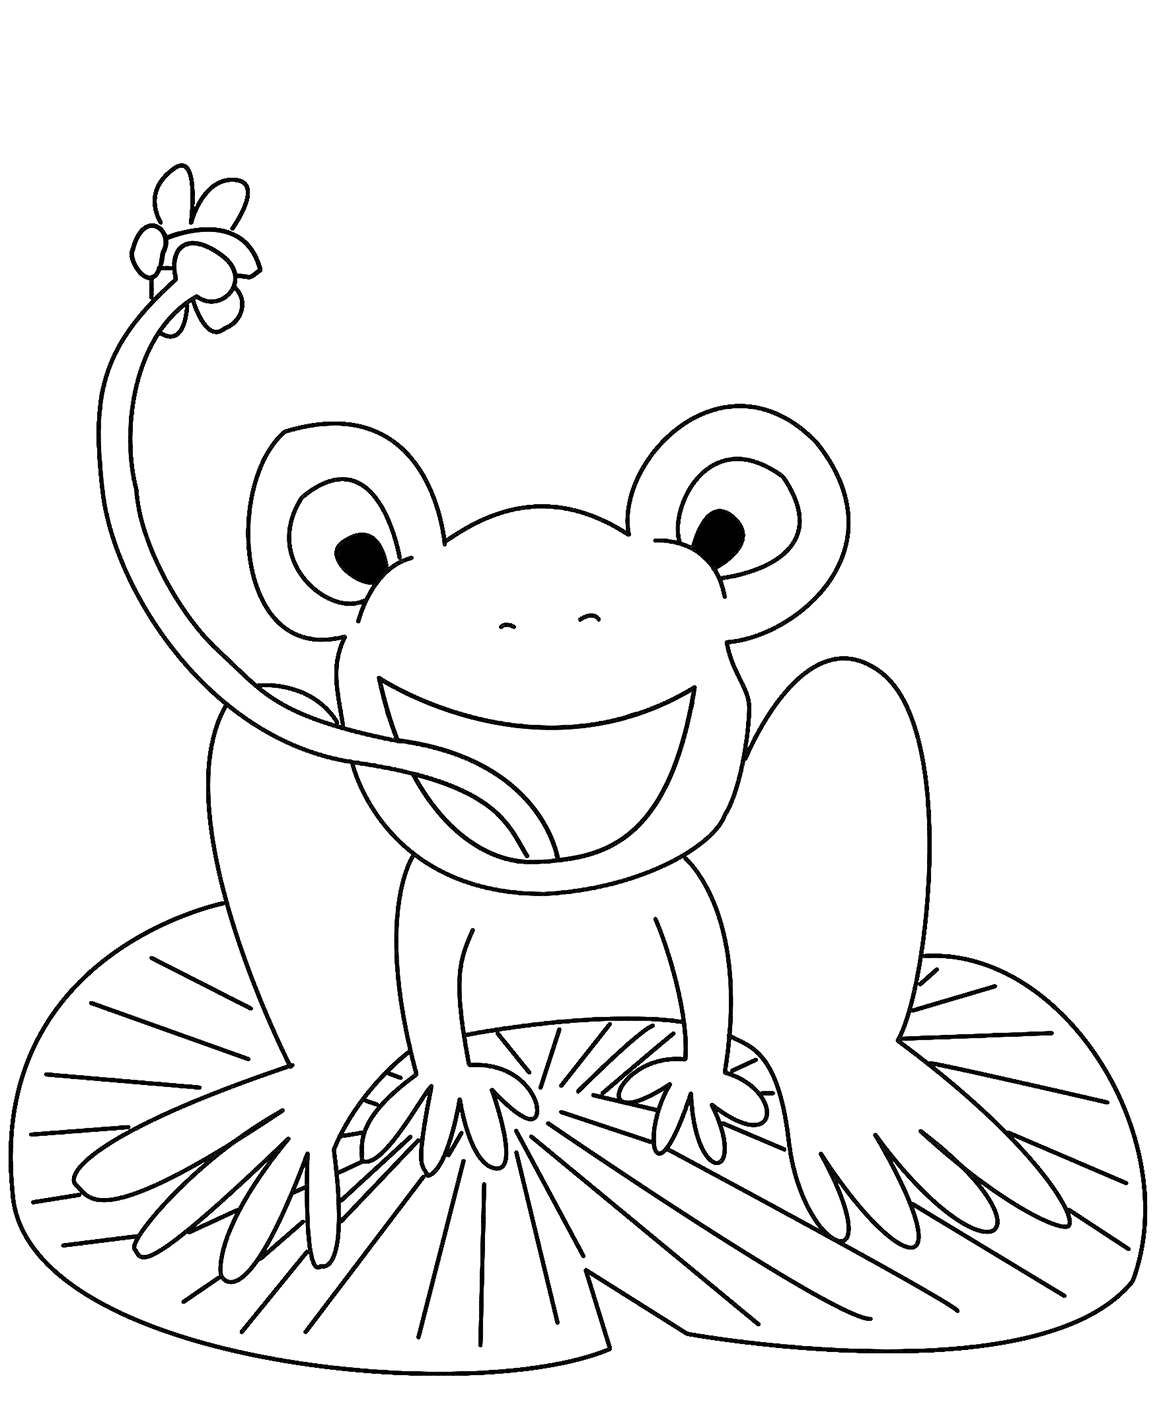 Frog On Lilypad Coloring Page